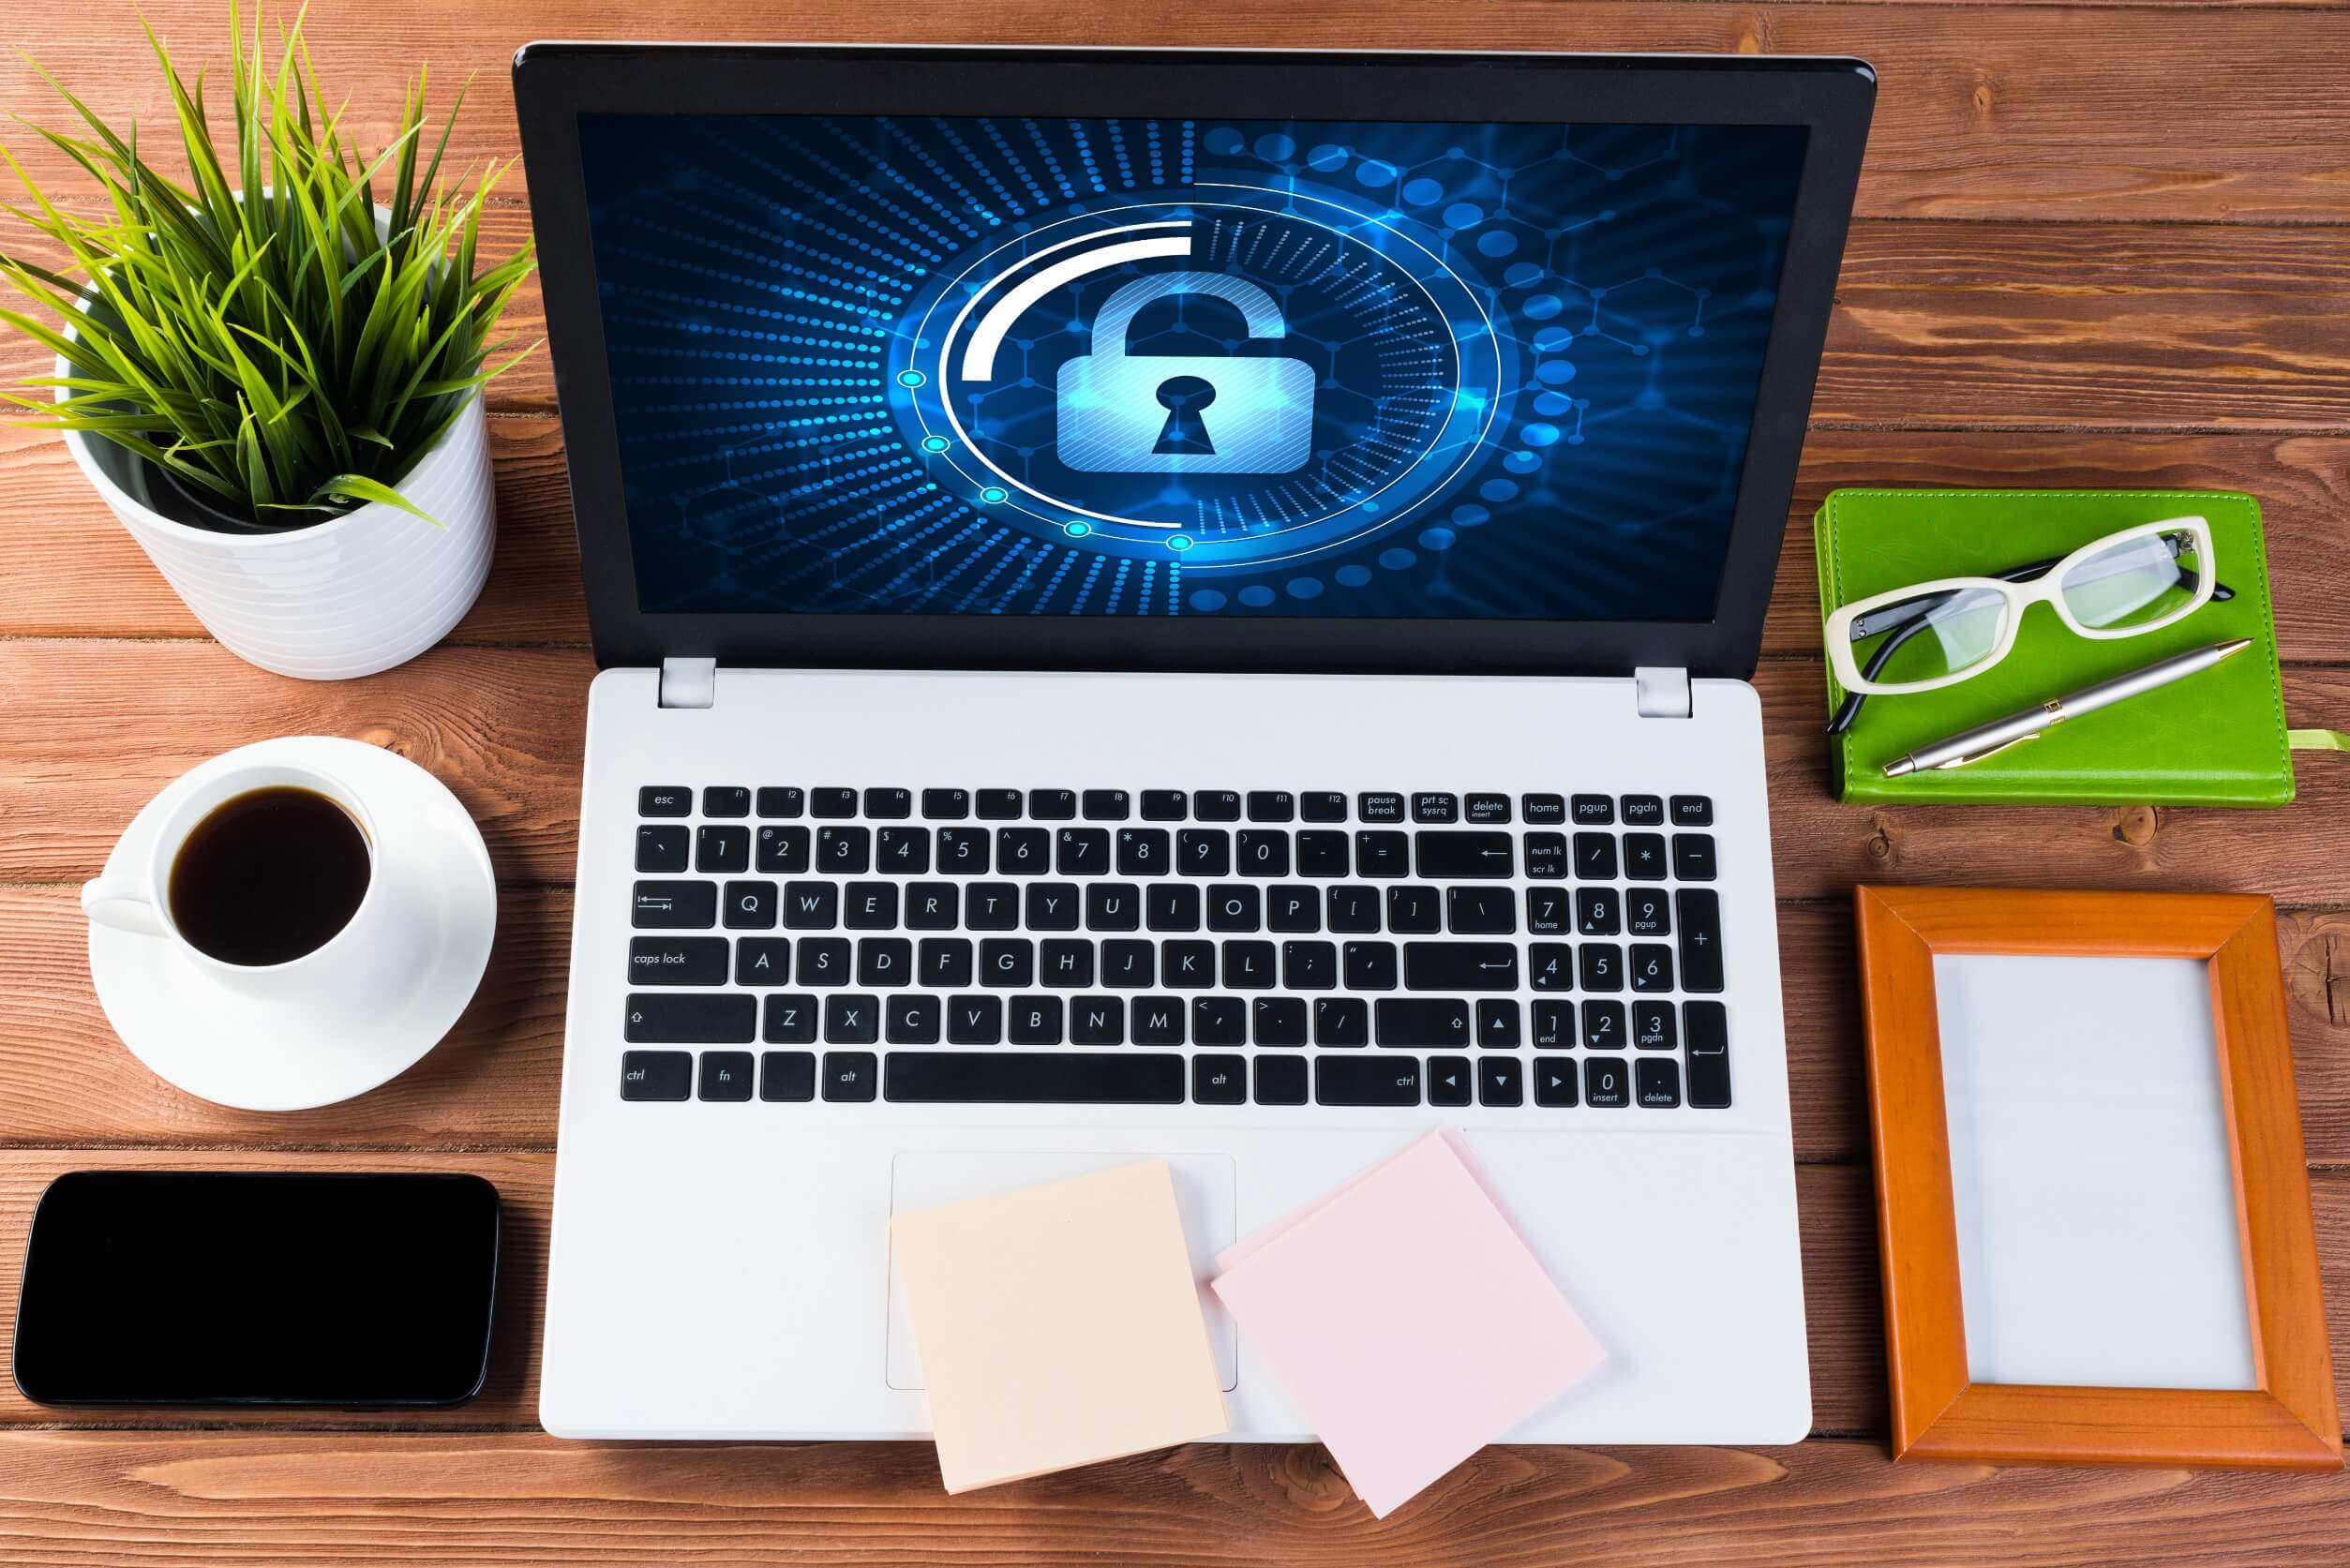 Essential Cybersecurity Tips Every Student Should Know